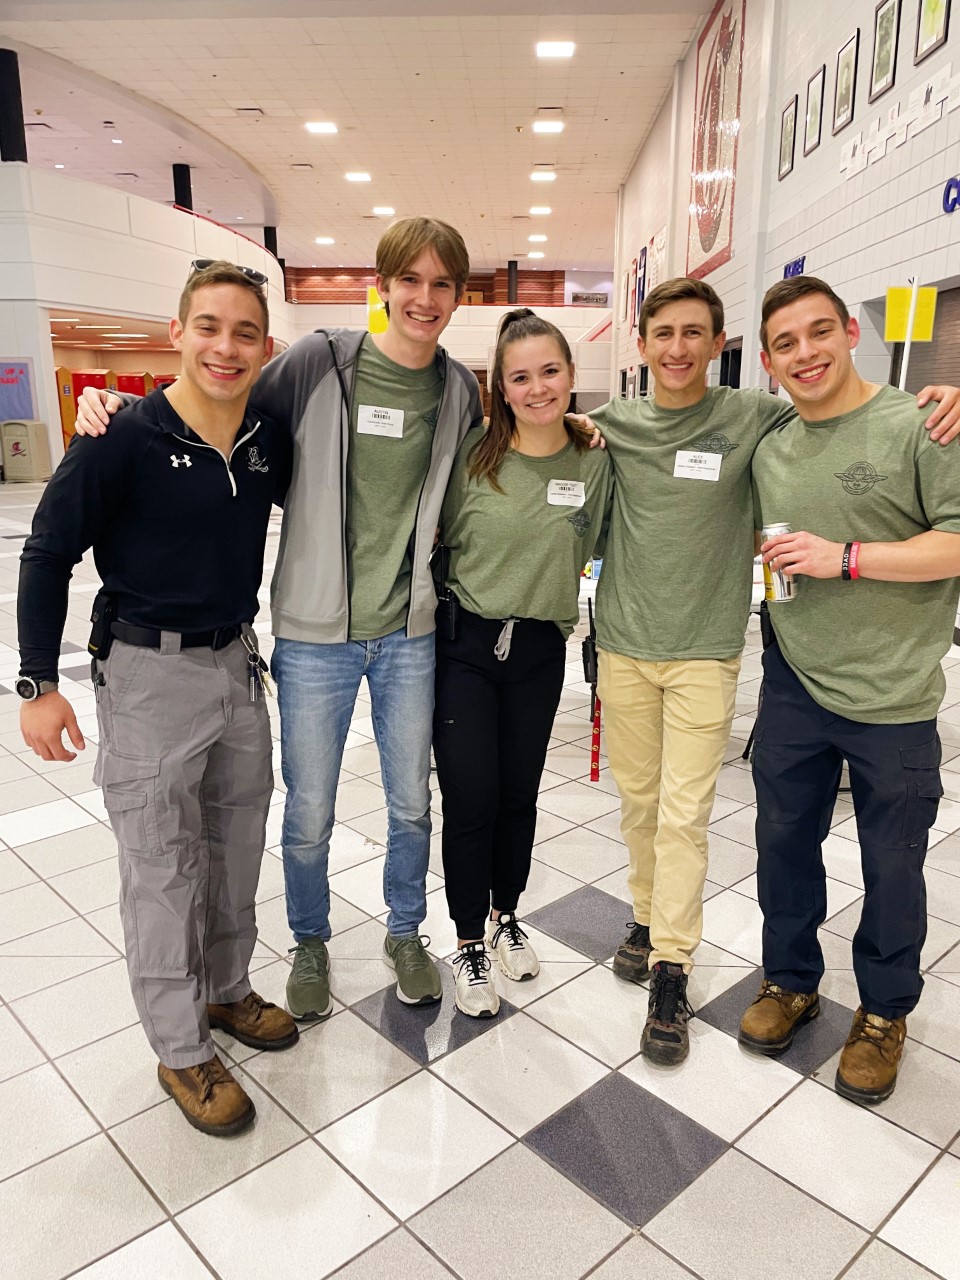 Tech students pose for a group photo. From left: Dominick Coker (Parking Lot/Fundraising Lead), Austin McCowan (Recruitment Lead), Maggie Teat (Promotions Lead), Alex Stovall (Head Lead), Alexander Coker (Hospitality Lead).